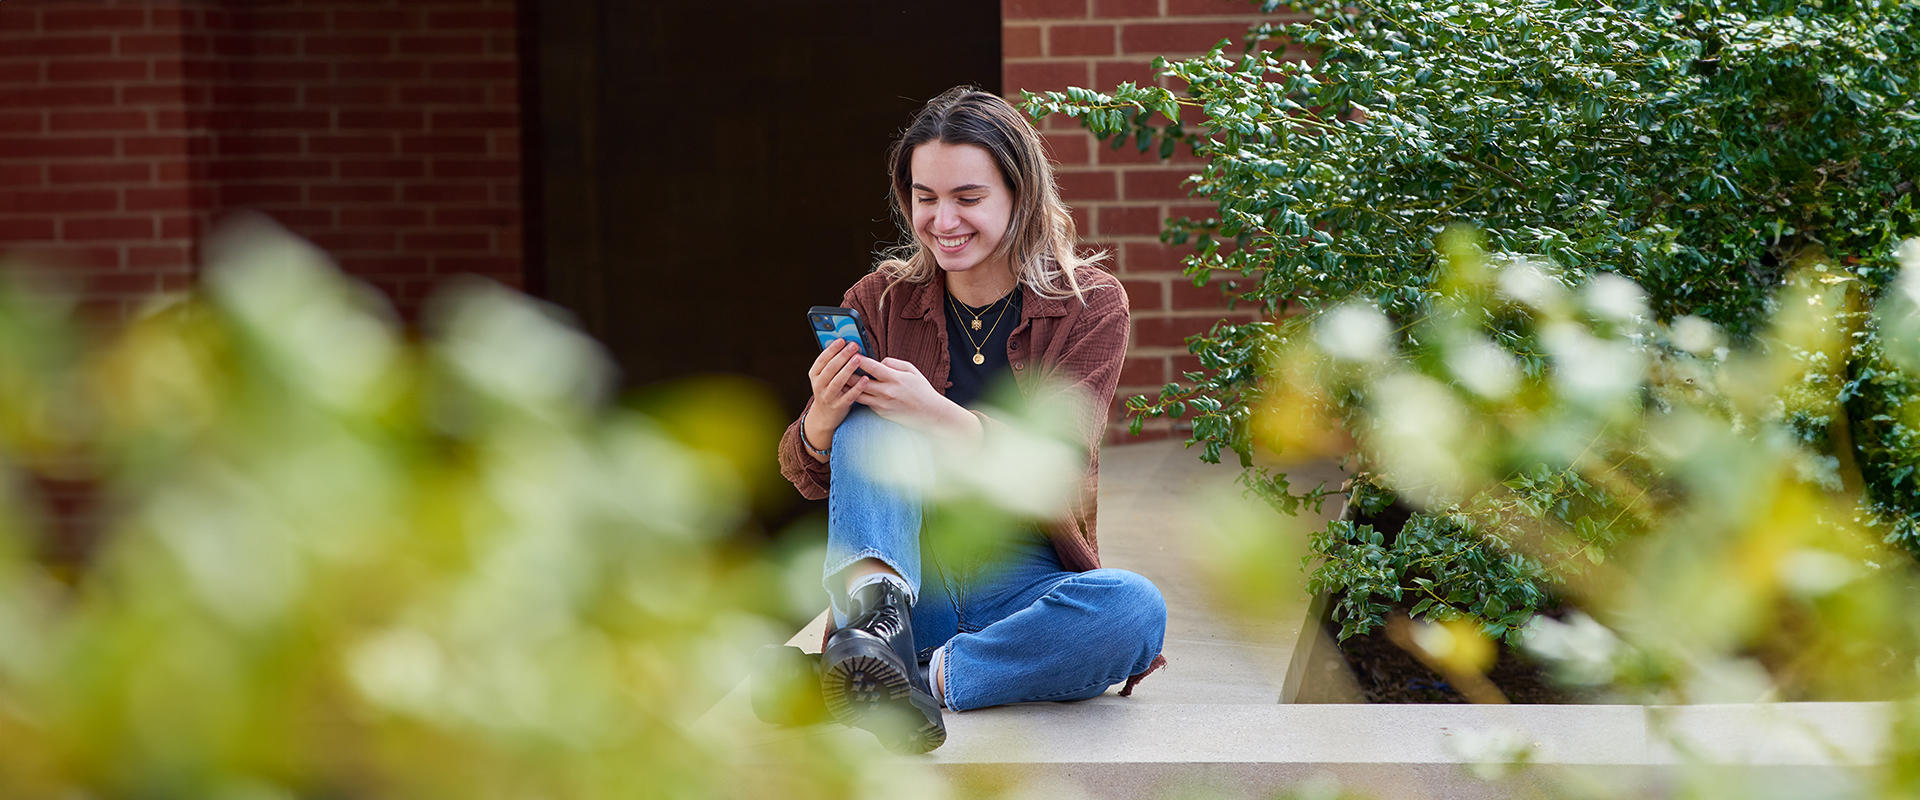 A student checks her phone outside her residence hall